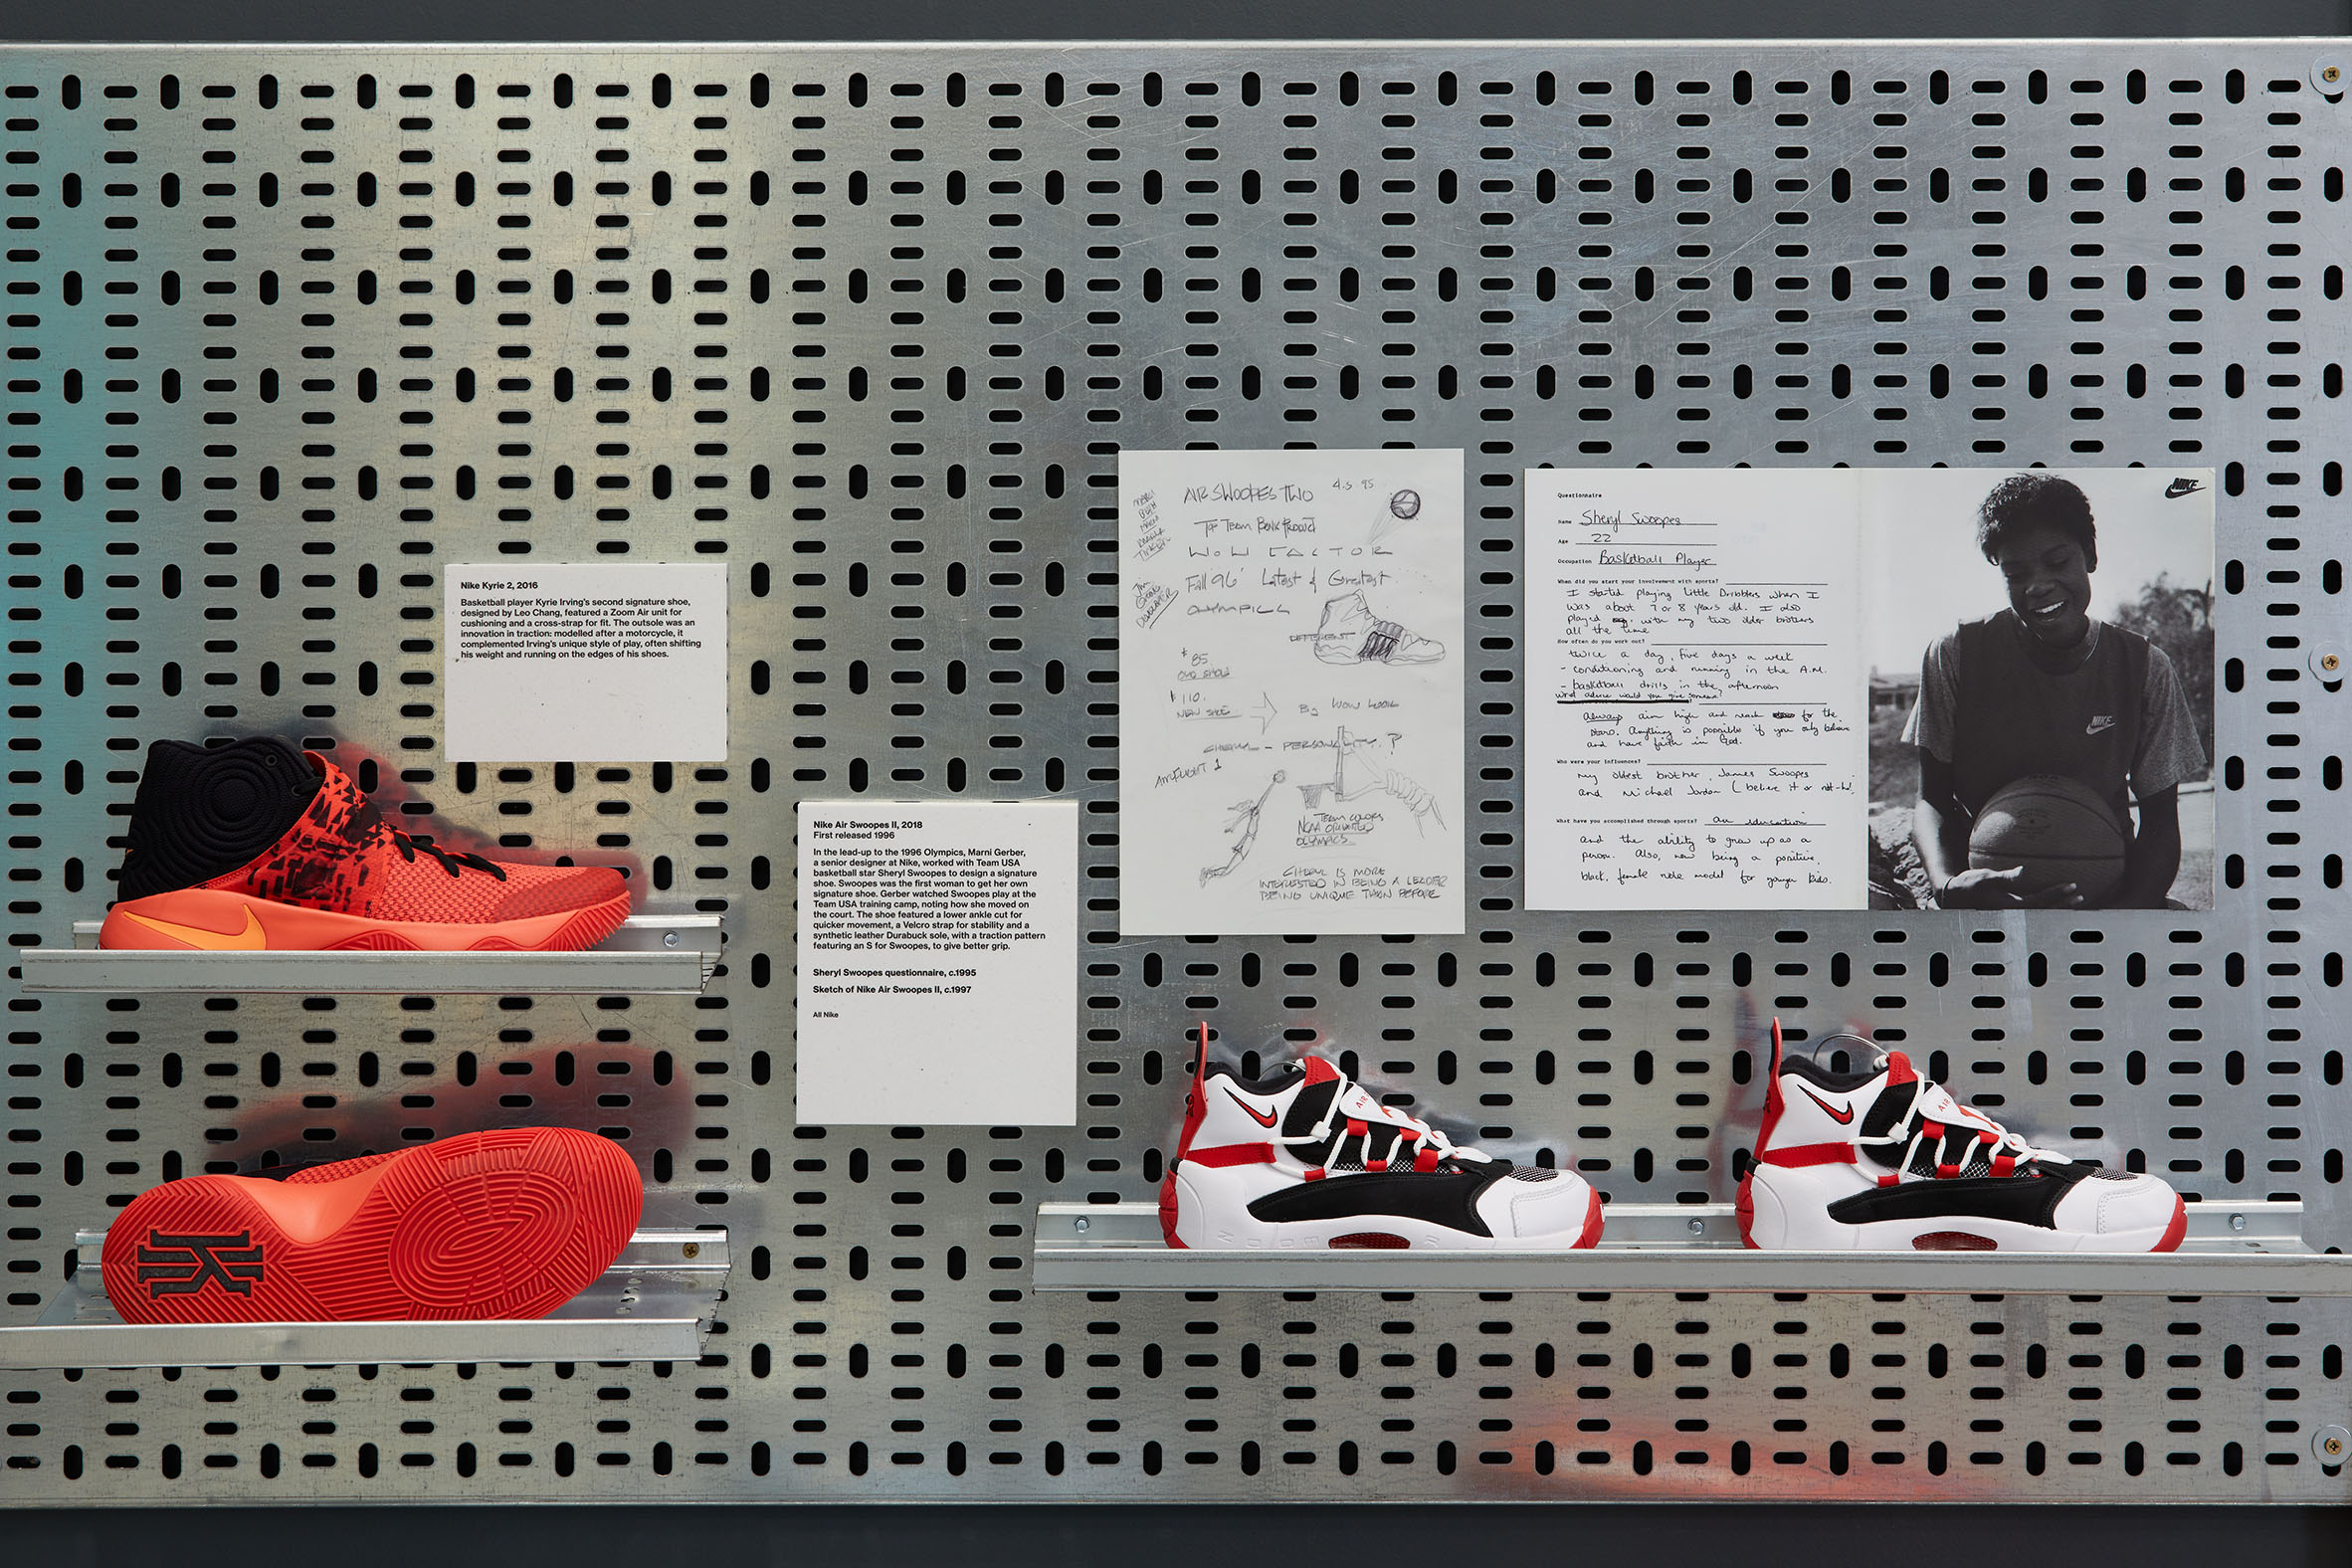 View within Performance section feature Nike Kyrie 2 and Nike Air Swoopes II